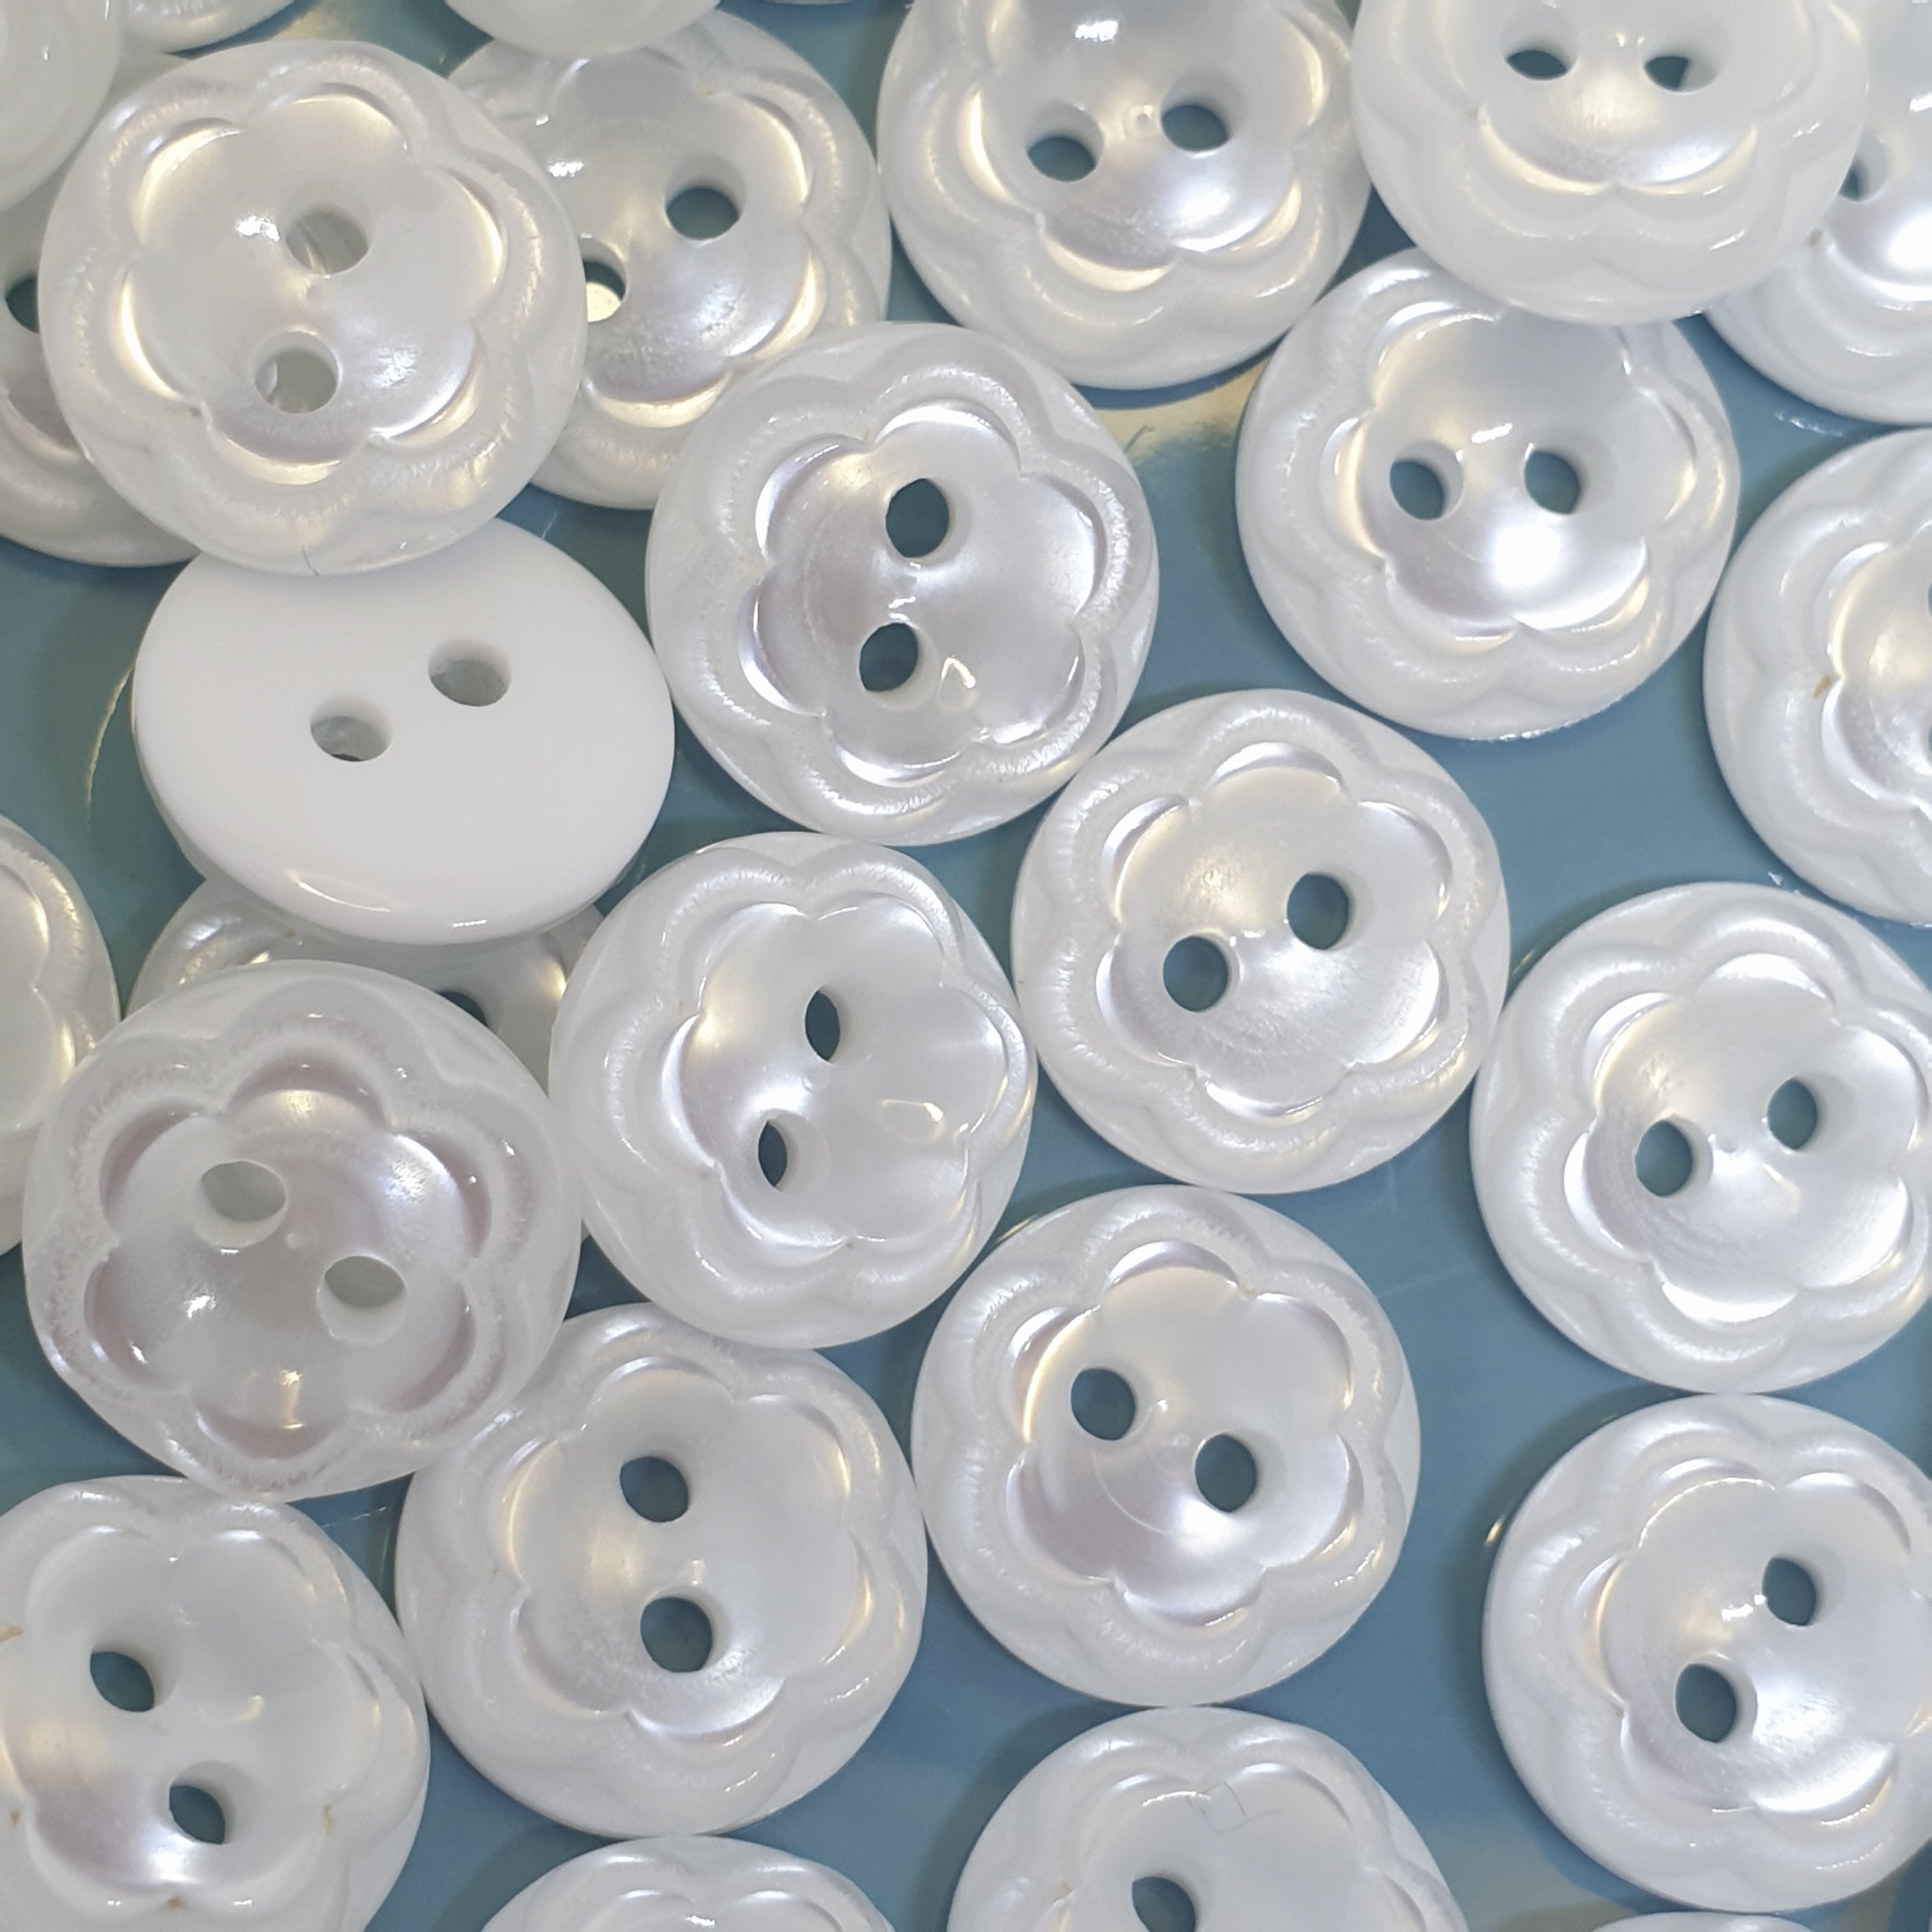 MajorCrafts 60pcs 11.5mm White Flower Pattern 2 Holes Small Round Resin Sewing Buttons